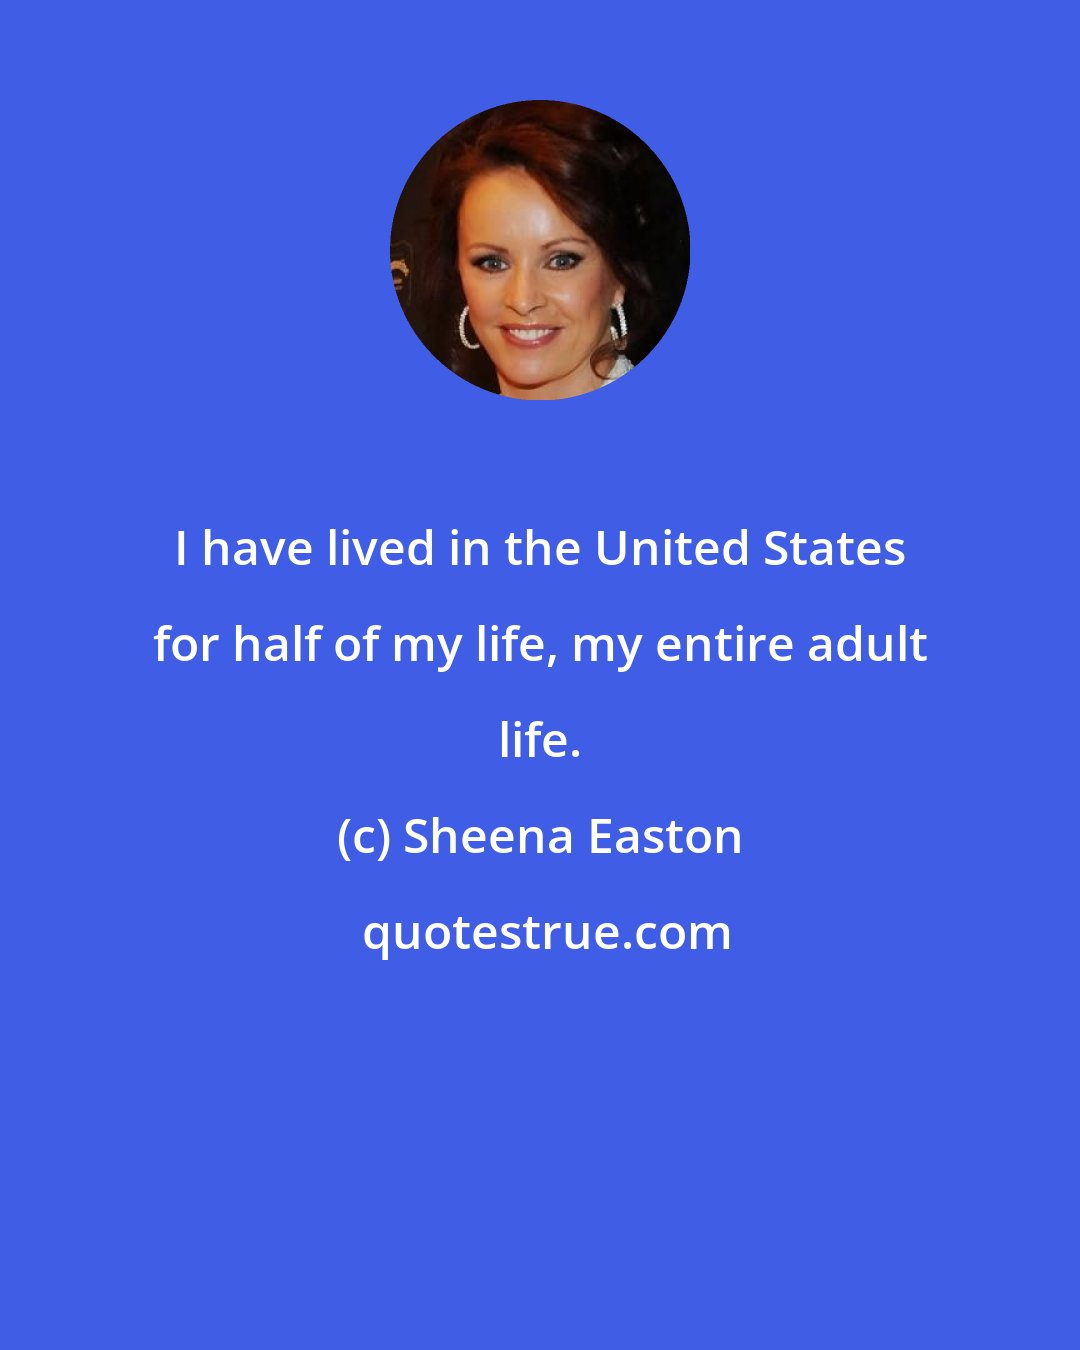 Sheena Easton: I have lived in the United States for half of my life, my entire adult life.